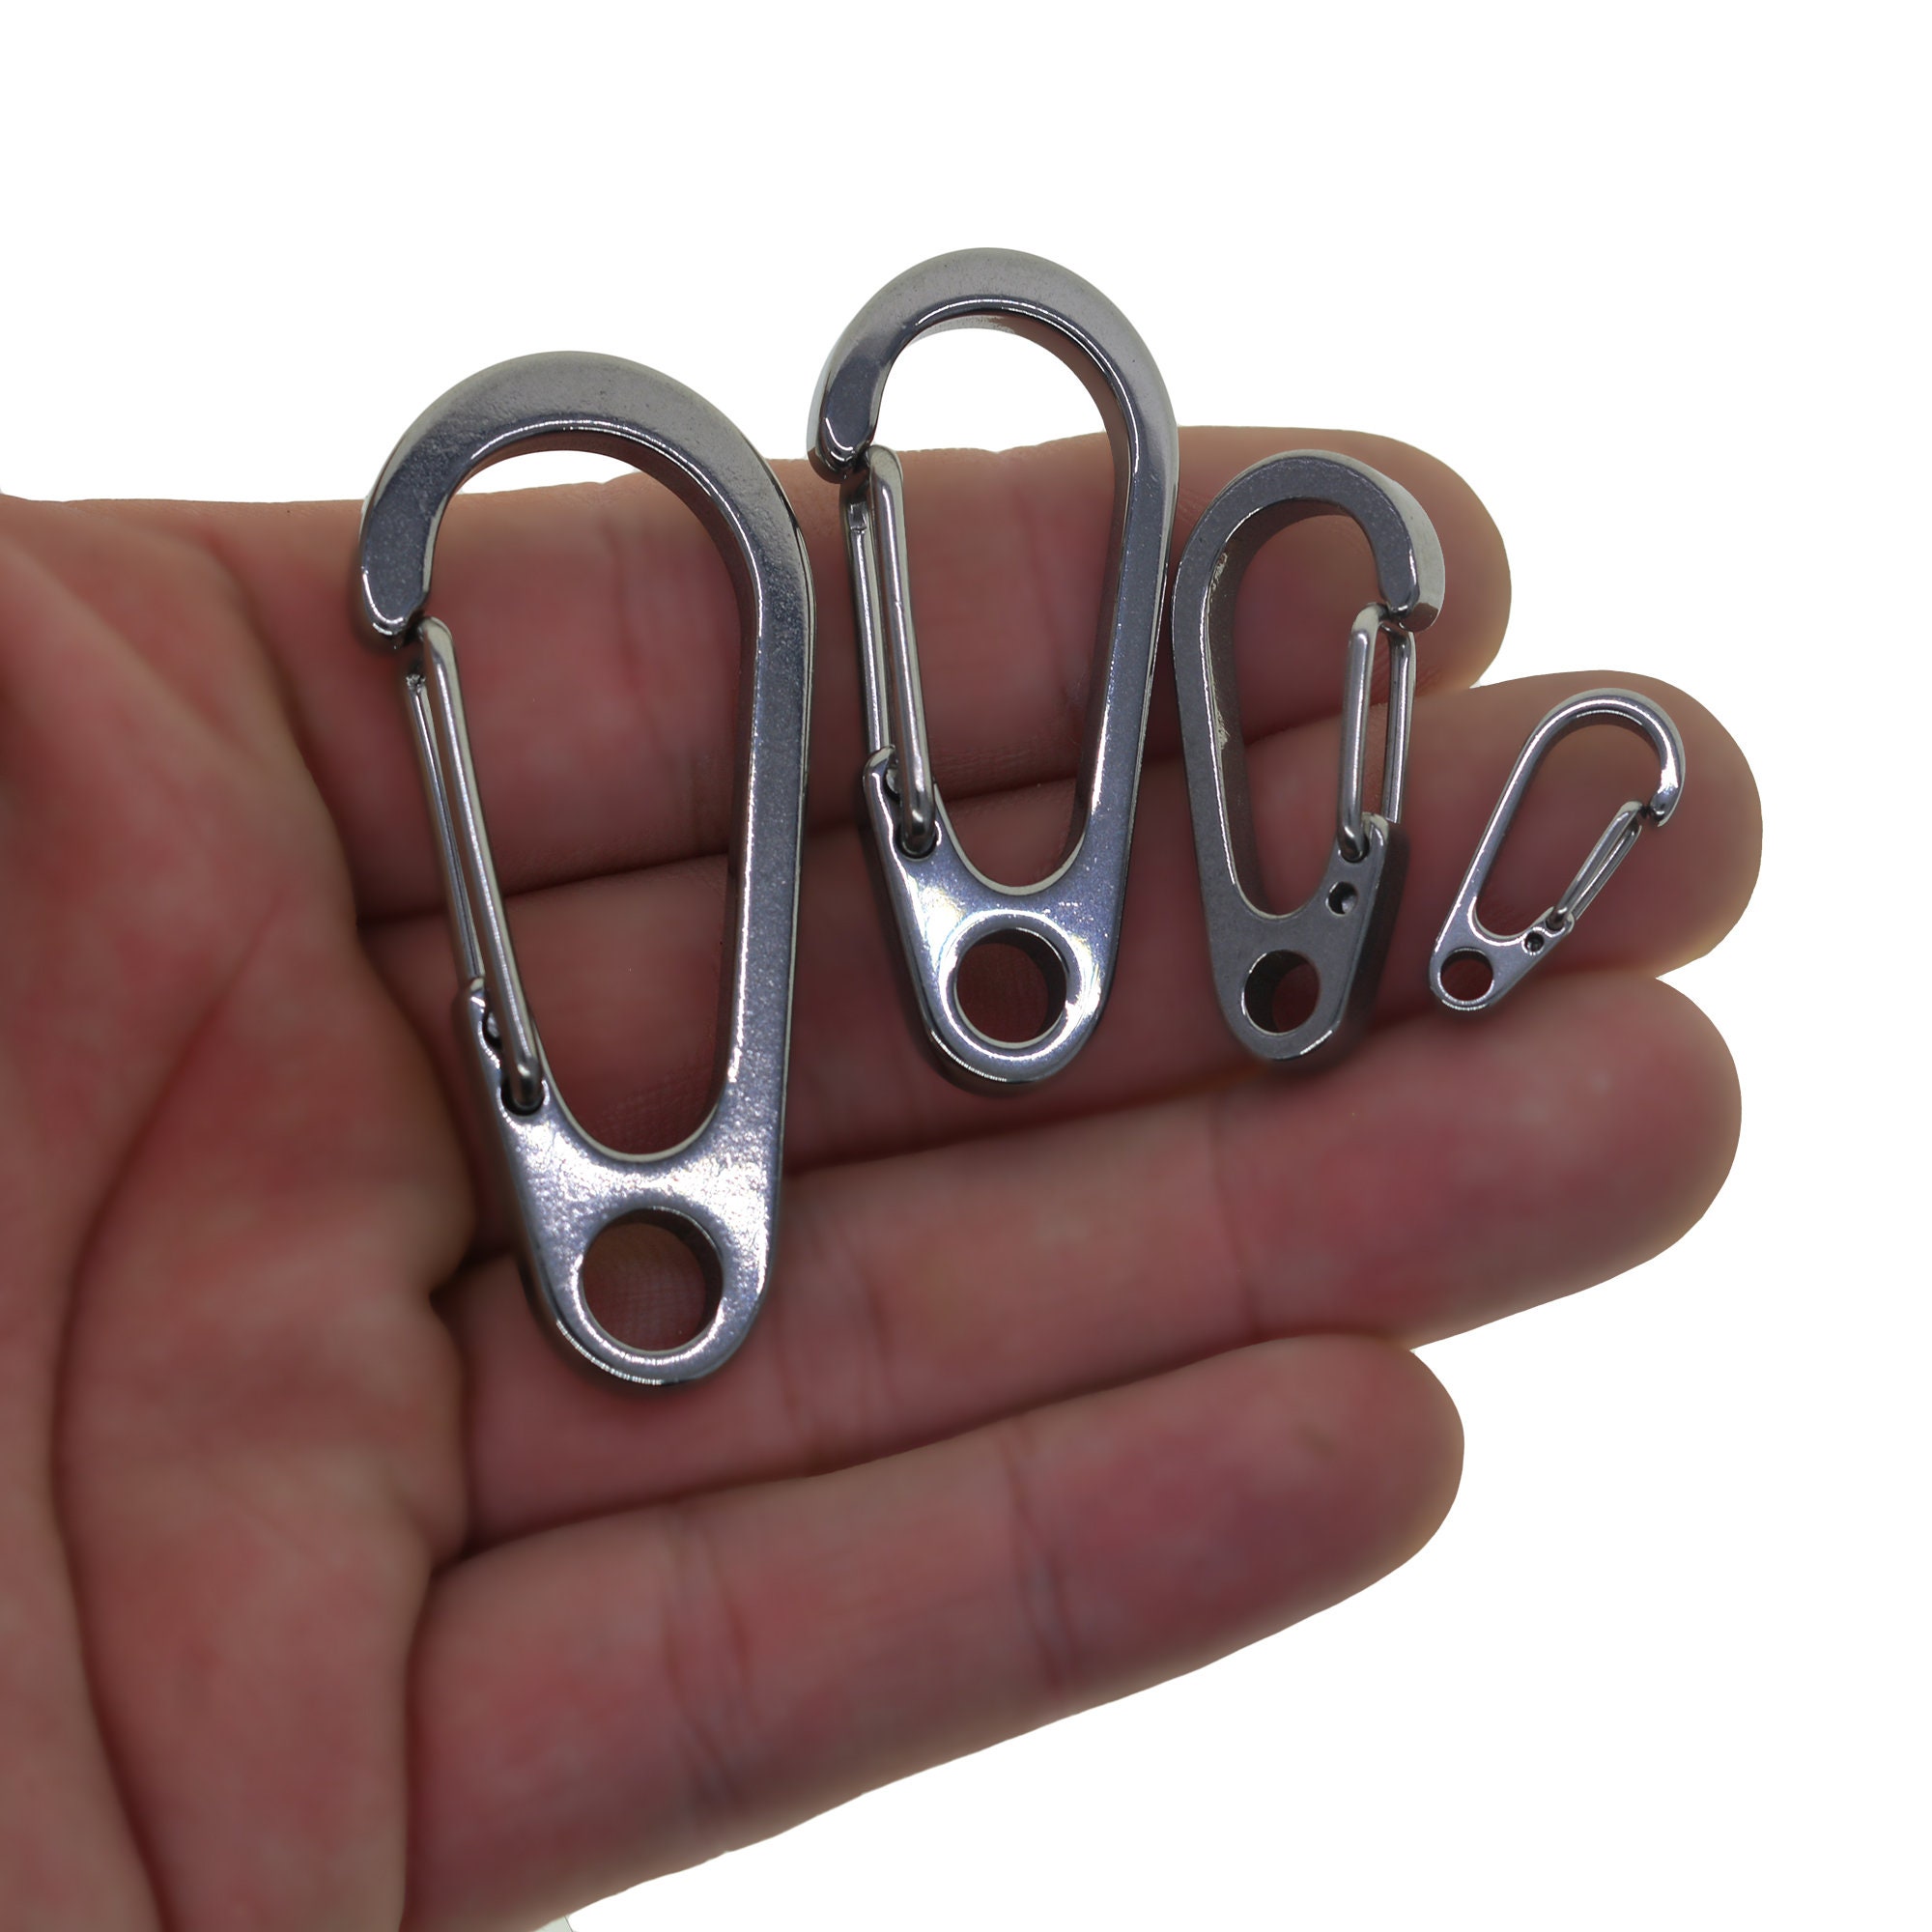 4pcs Carabiner Snap Hook Paracord Camping Keychain Accessories Push Gate  Clips / High Quality 